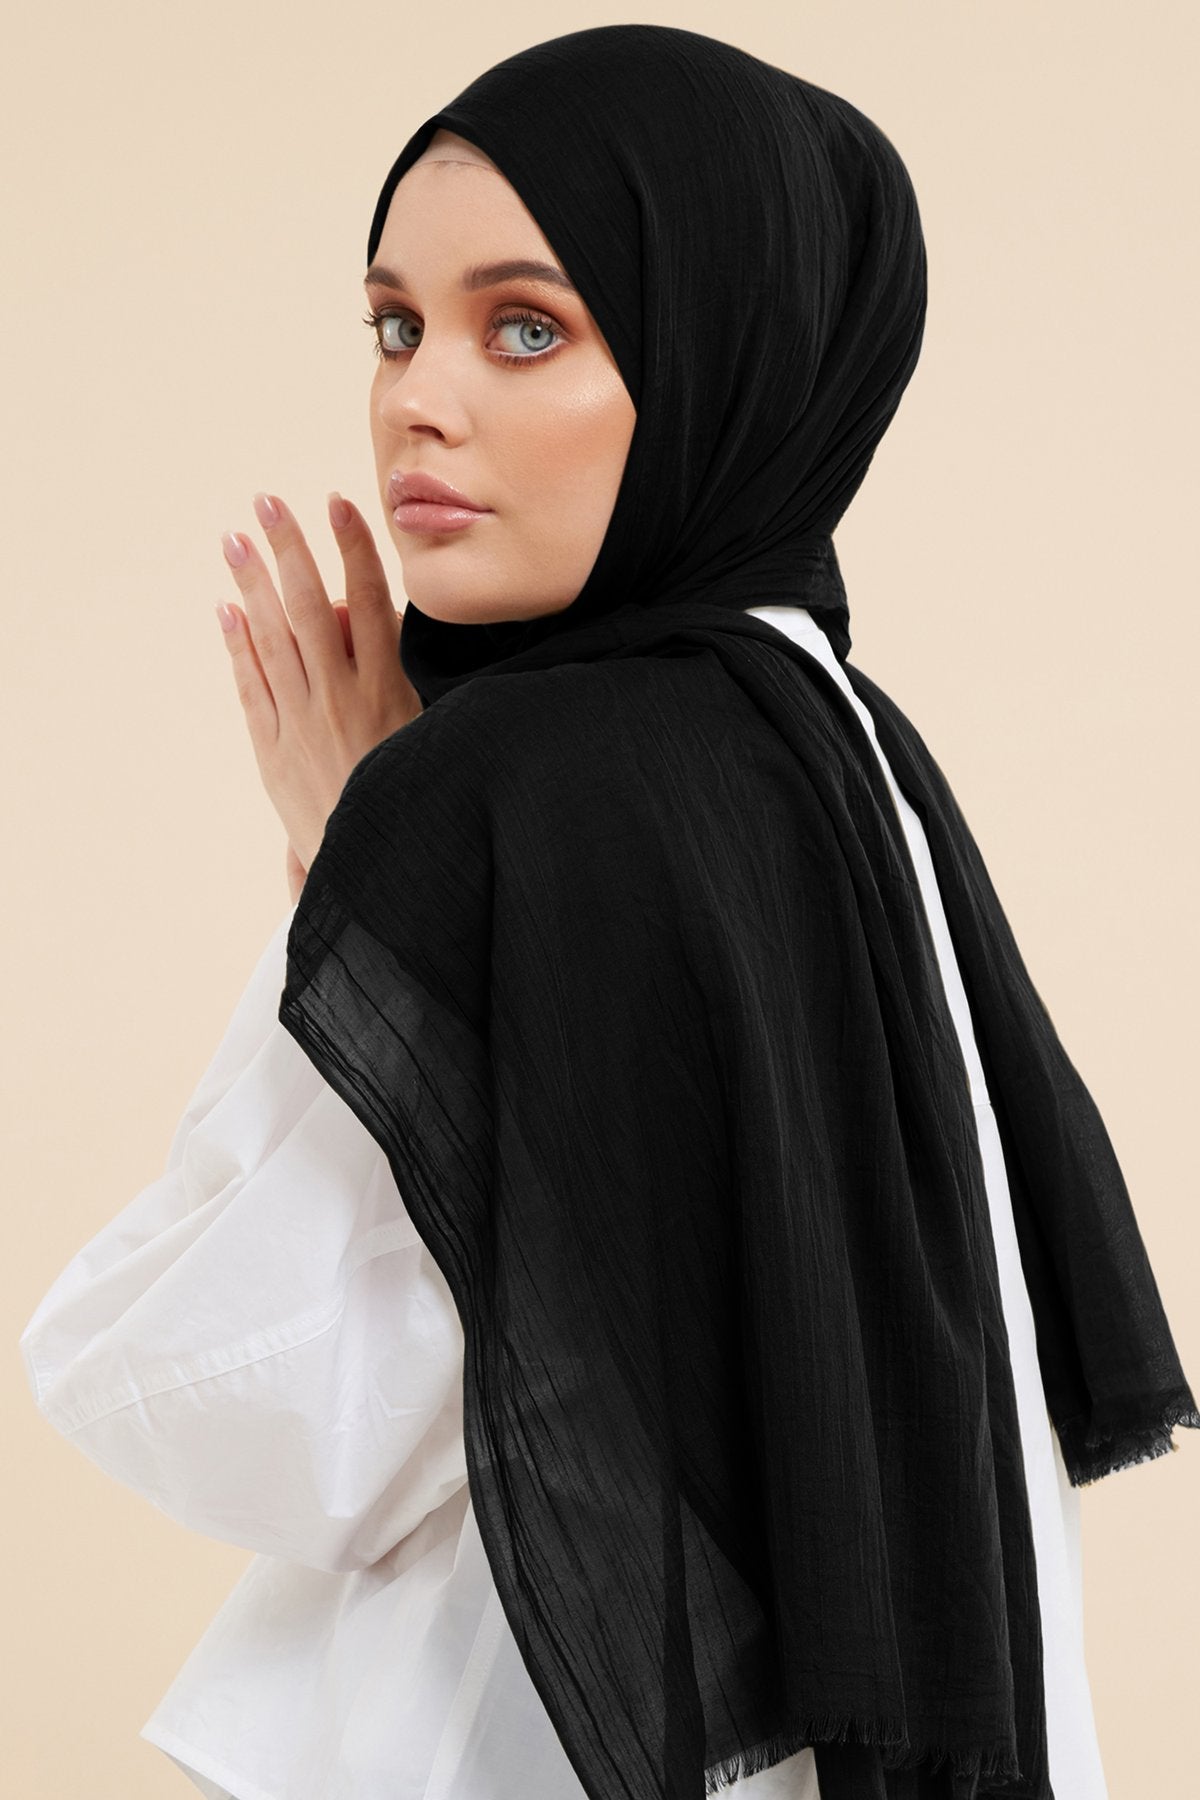 The Hidden Truth About The Nike Burkini – CAVE